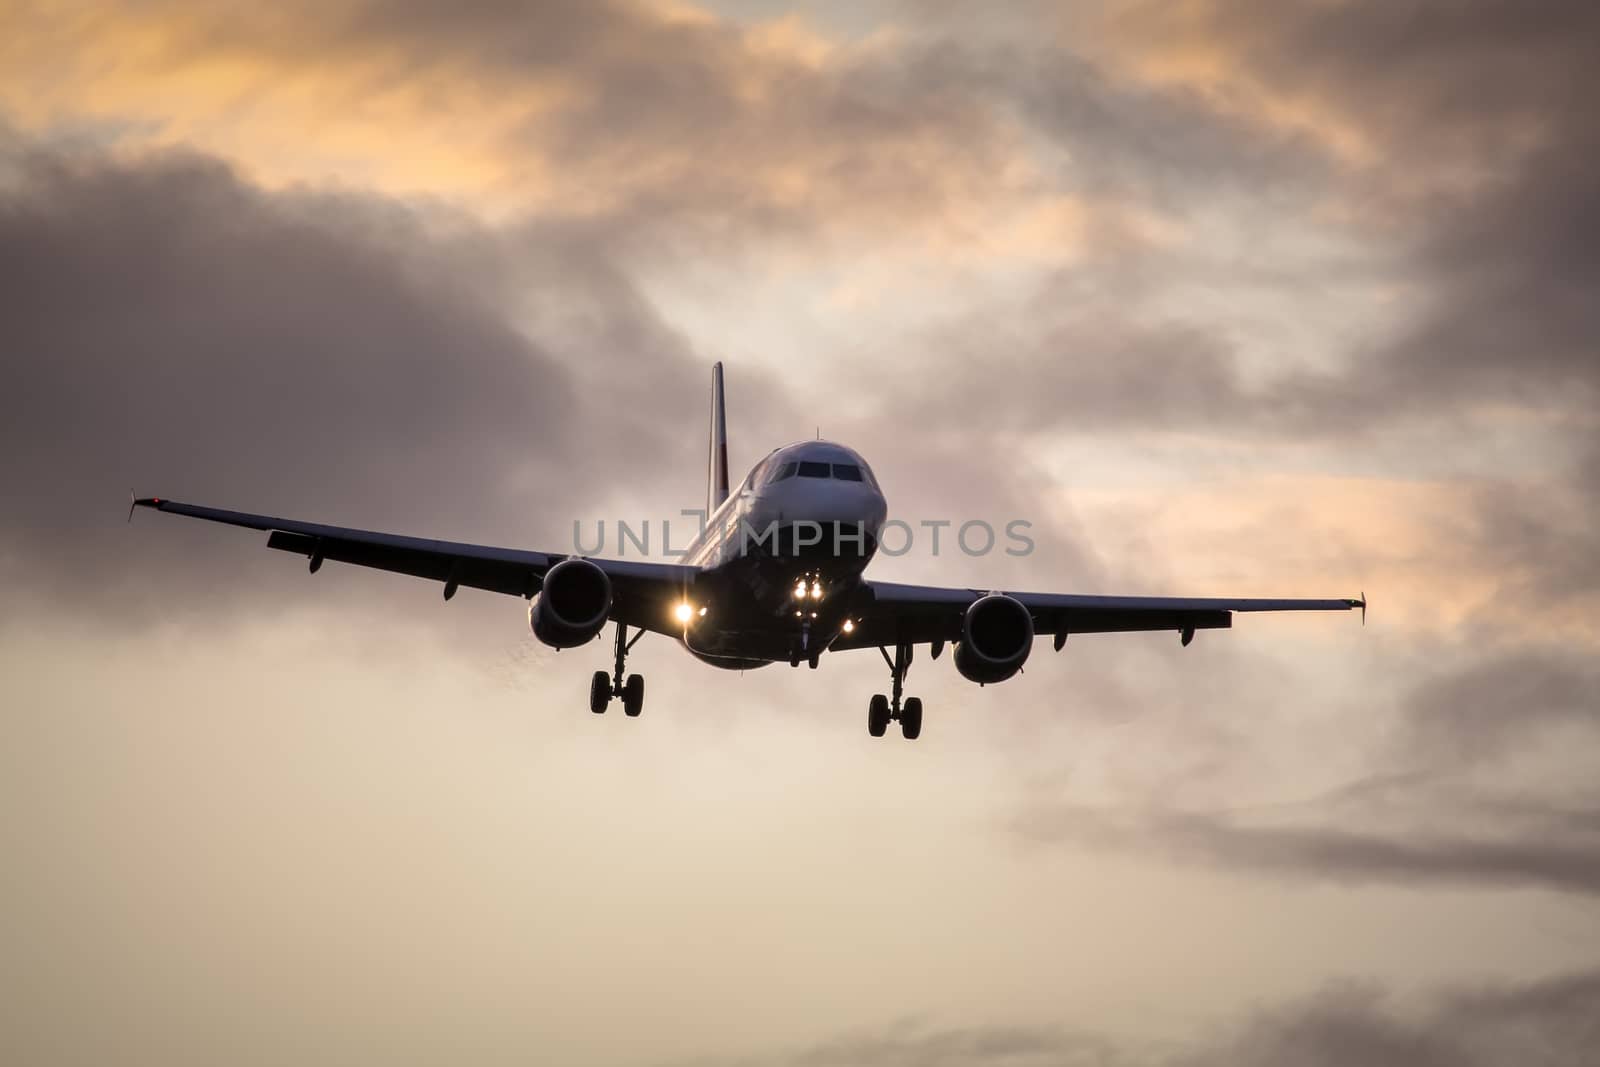 A photography of a jet air plane in sunset sky